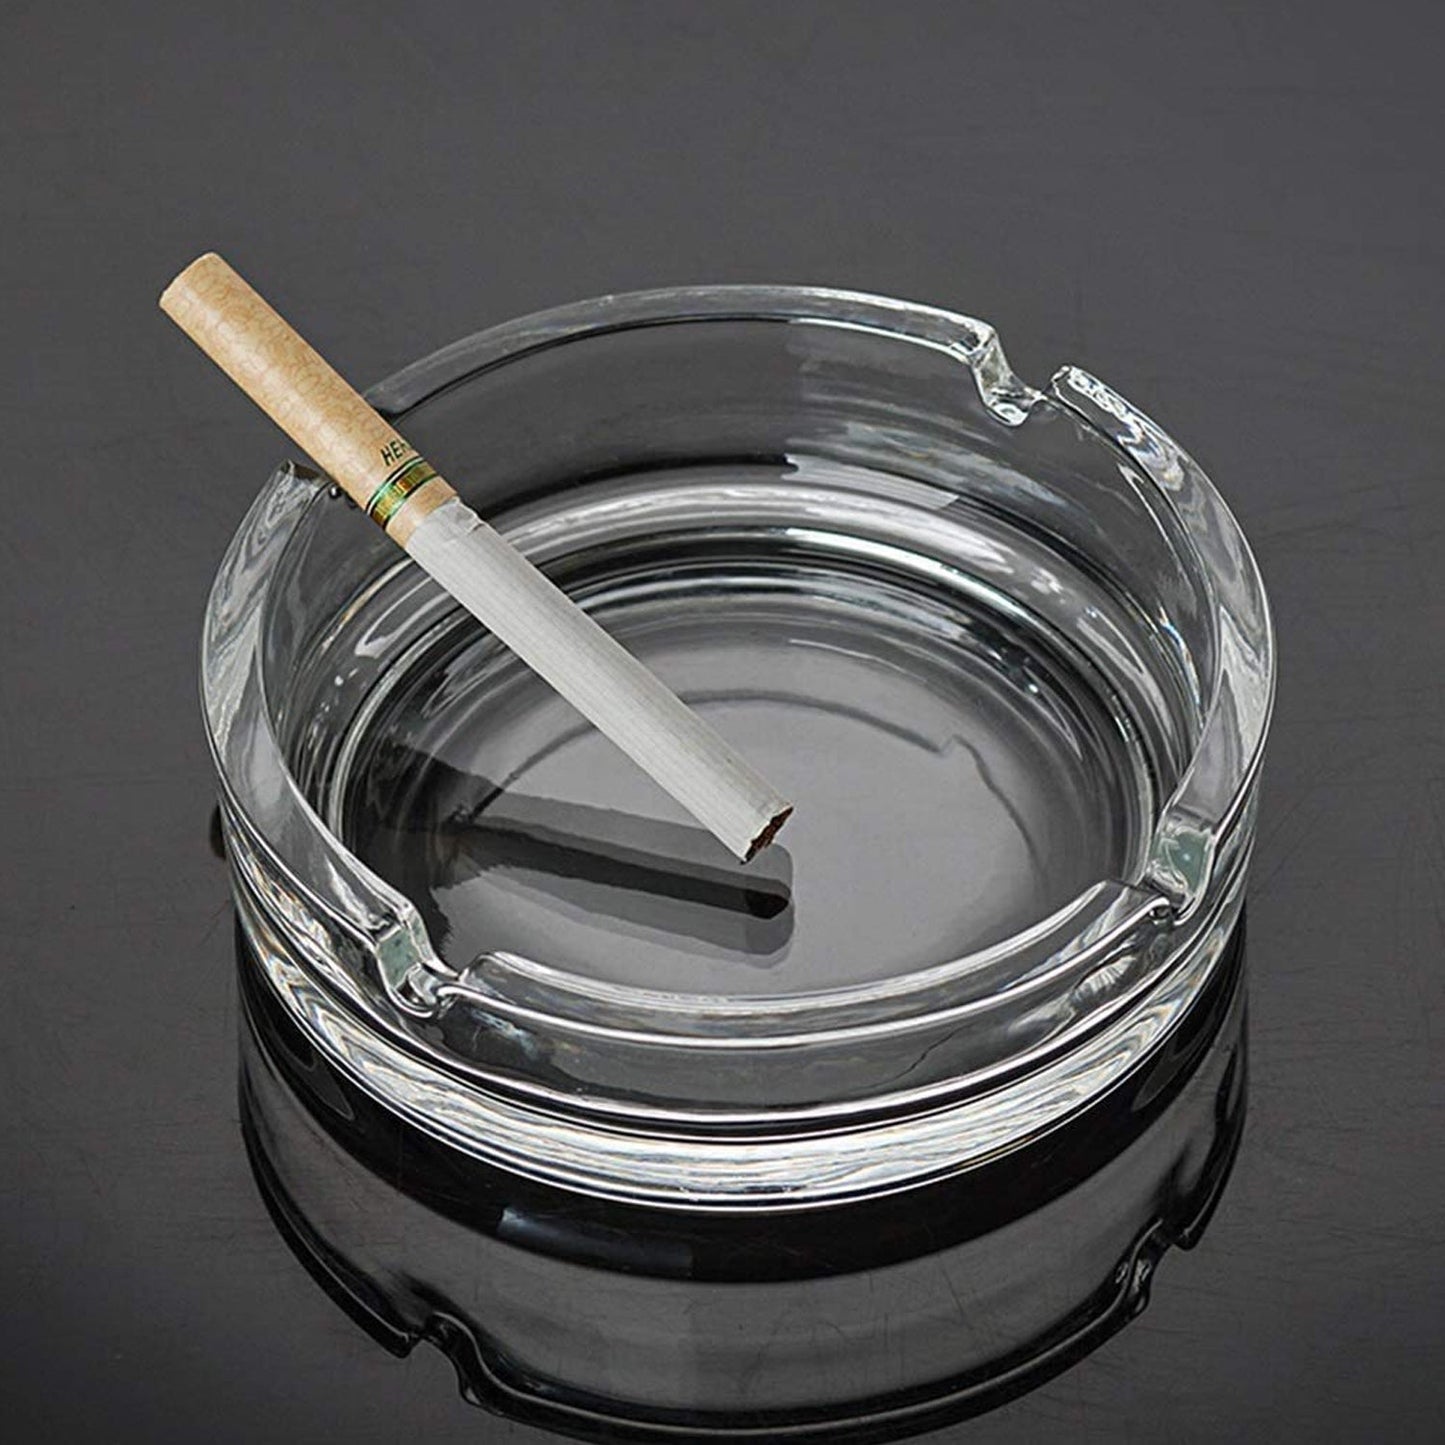 4061 Glass Classic Crystal Quality Cigar Cigarette Ashtray Round Tabletop for Home Office Indoor Outdoor Home Decor DeoDap